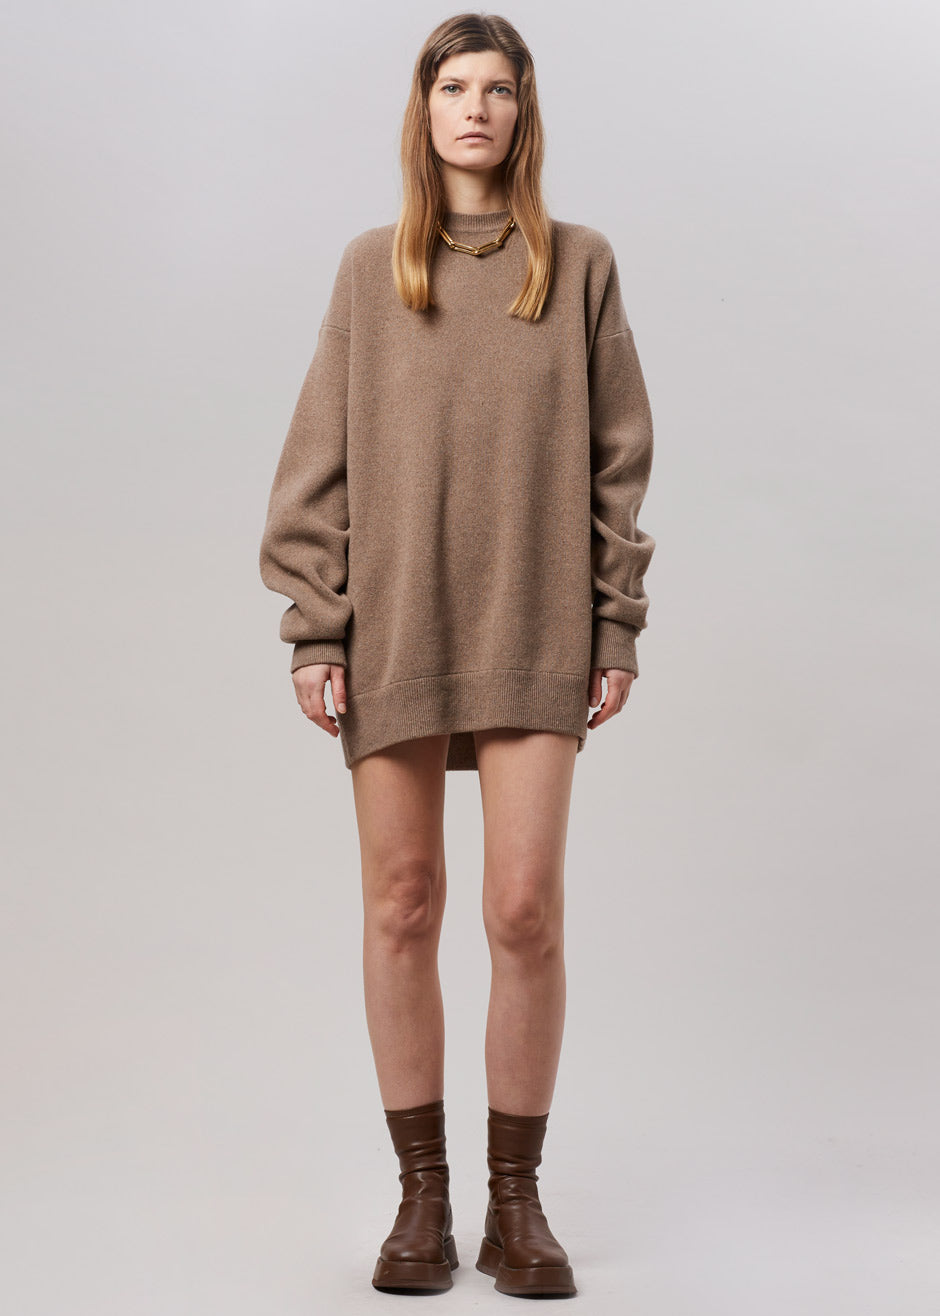 Hadrien Italian Recycled Cashmere Sweater - Taupe - 4